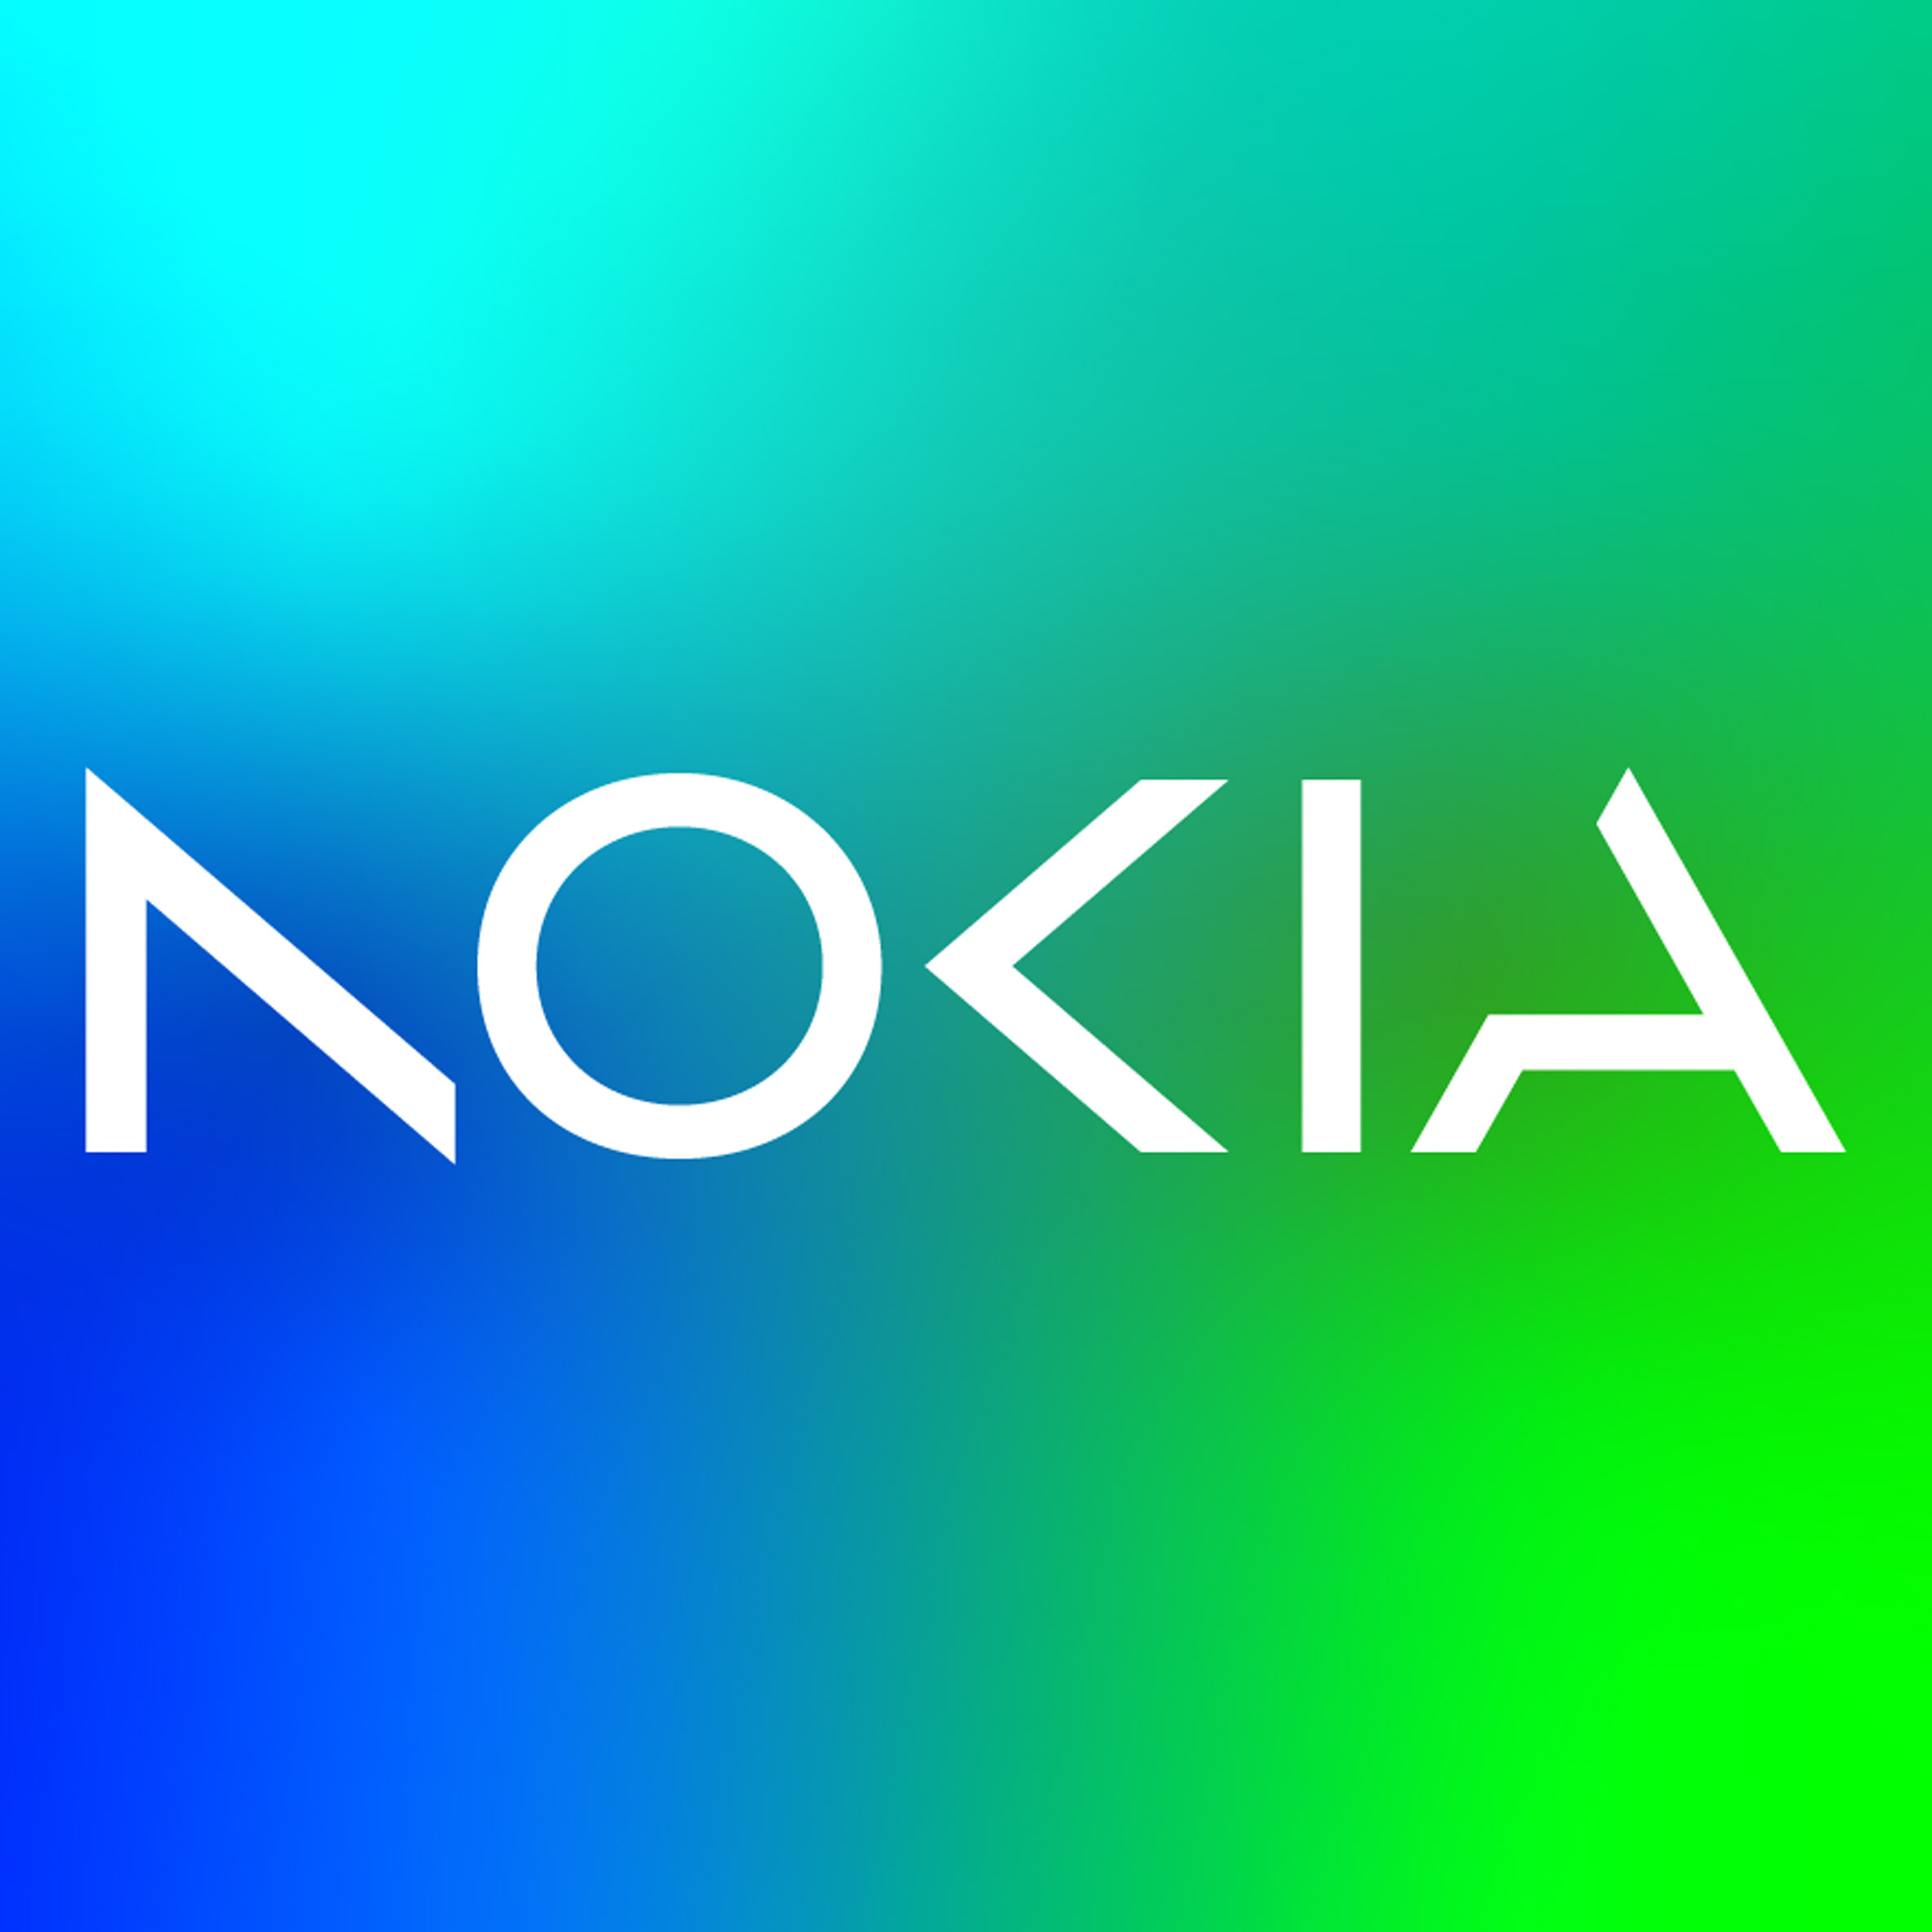 Nokia logo redesign on a green and blue gradient background